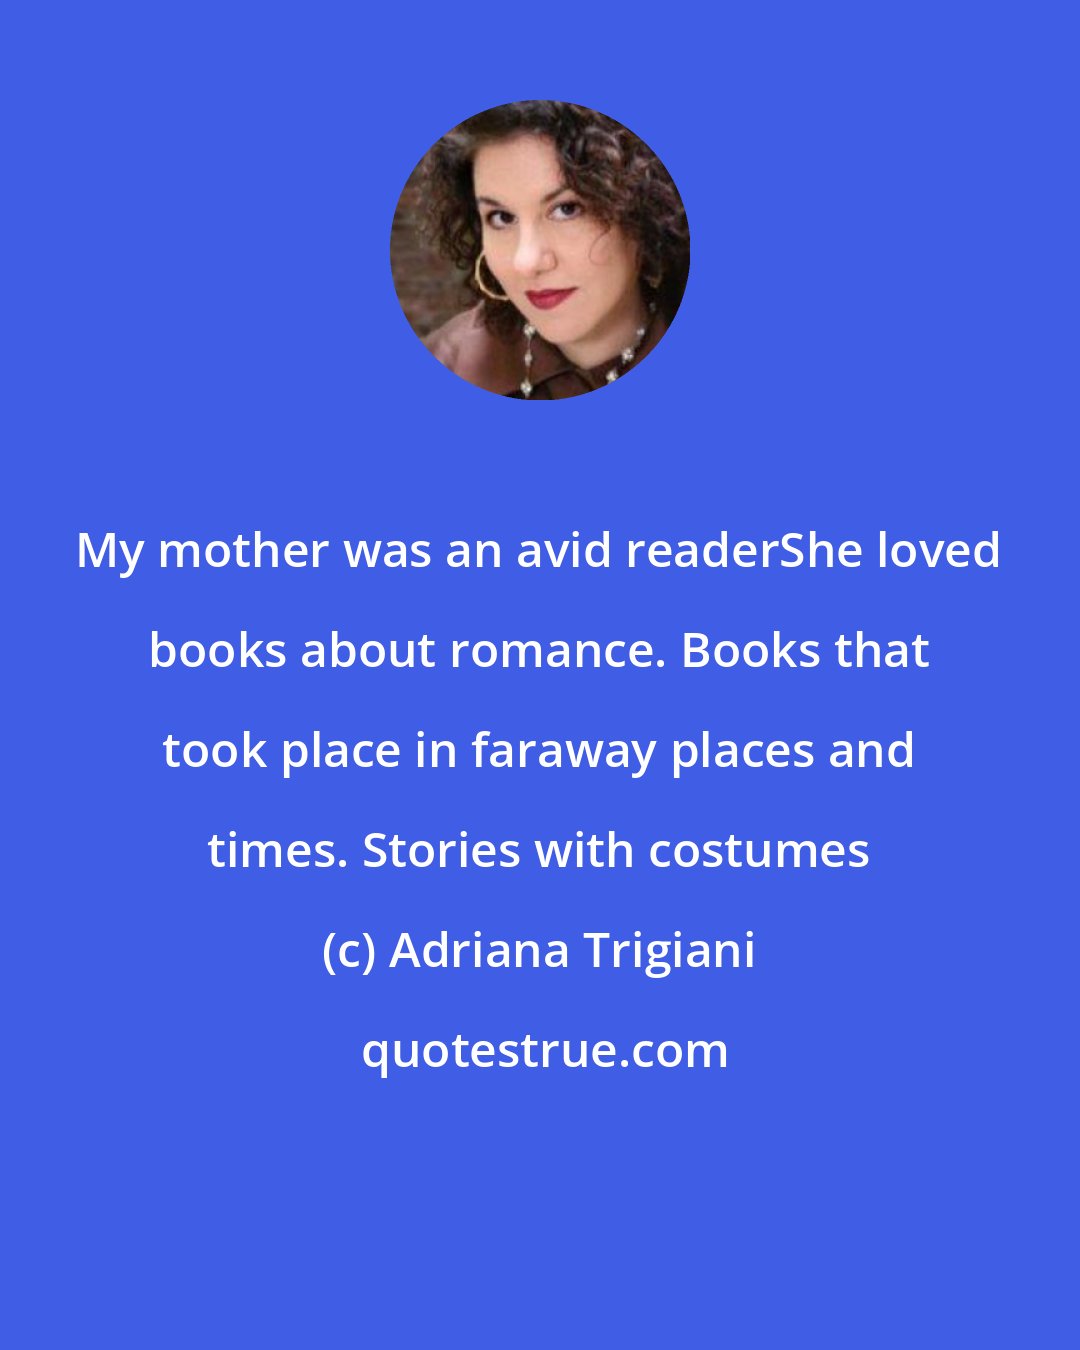 Adriana Trigiani: My mother was an avid readerShe loved books about romance. Books that took place in faraway places and times. Stories with costumes